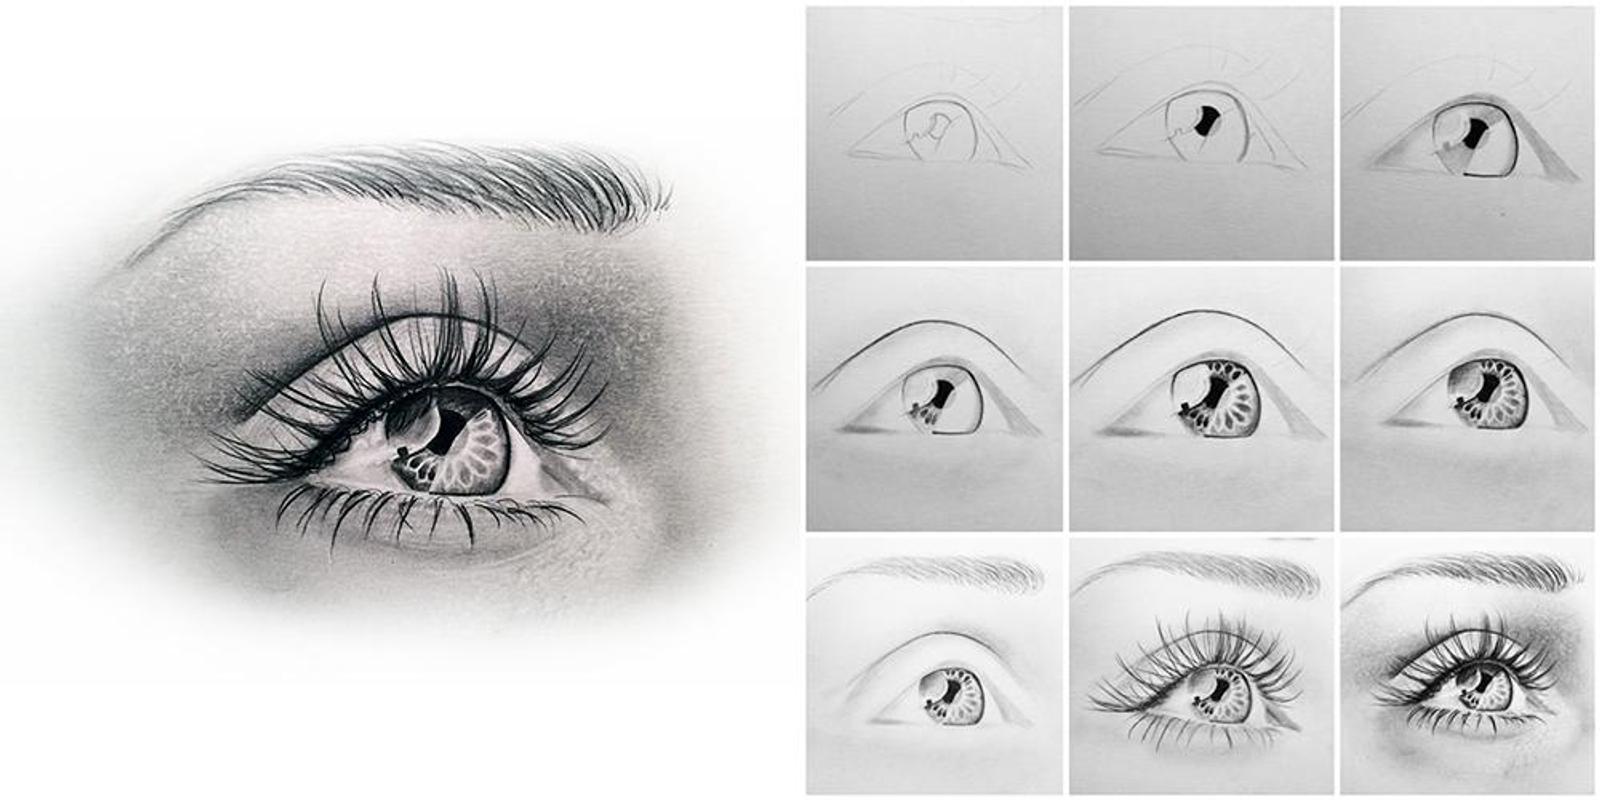 How To Draw An Eye Step By Step : DOs & DON'Ts: How to Draw Realistic